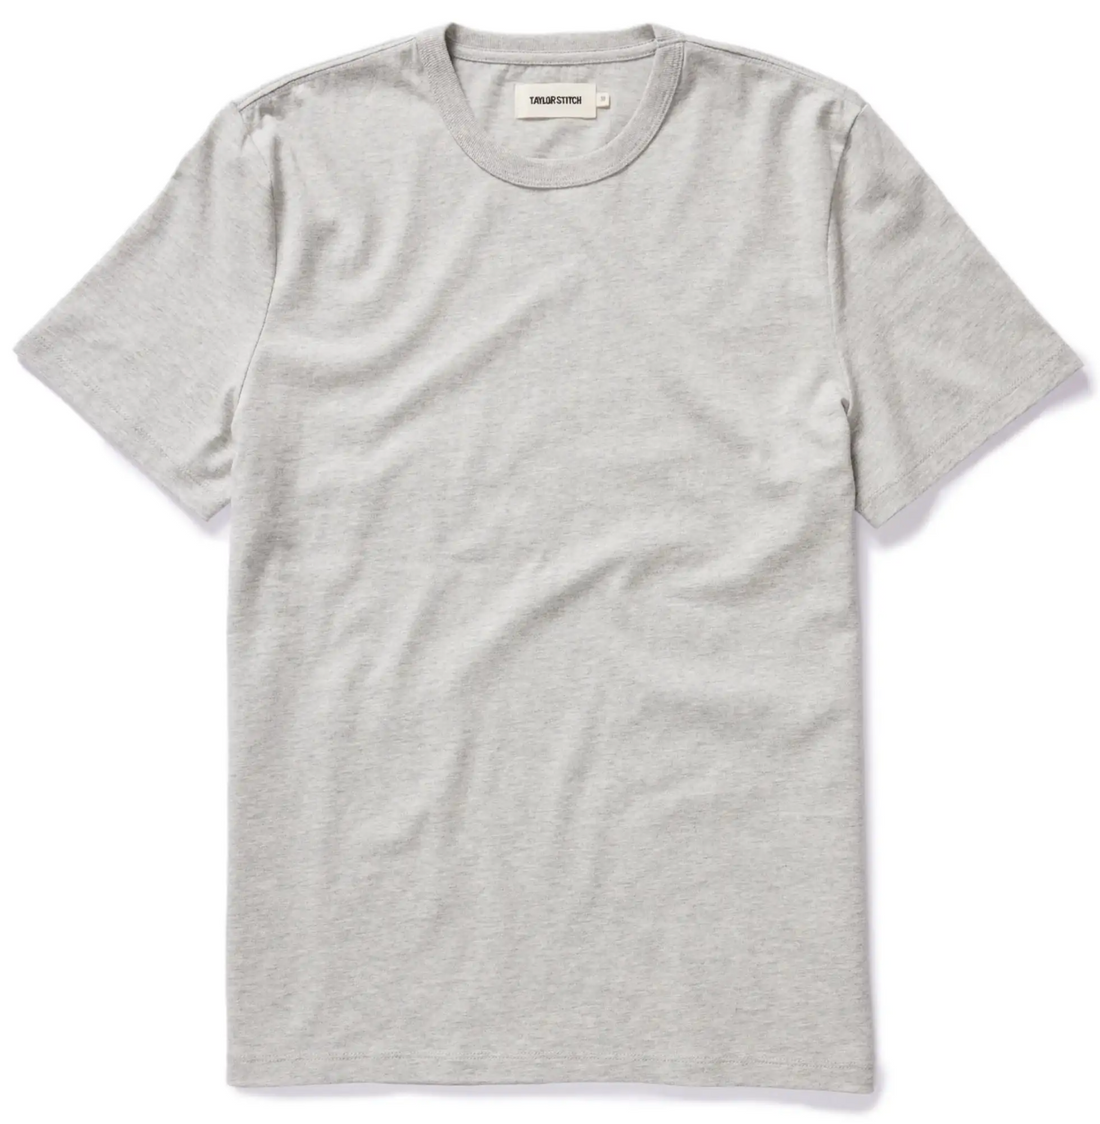 Taylor Stitch - The Organic Cotton Tee in Heather Grey